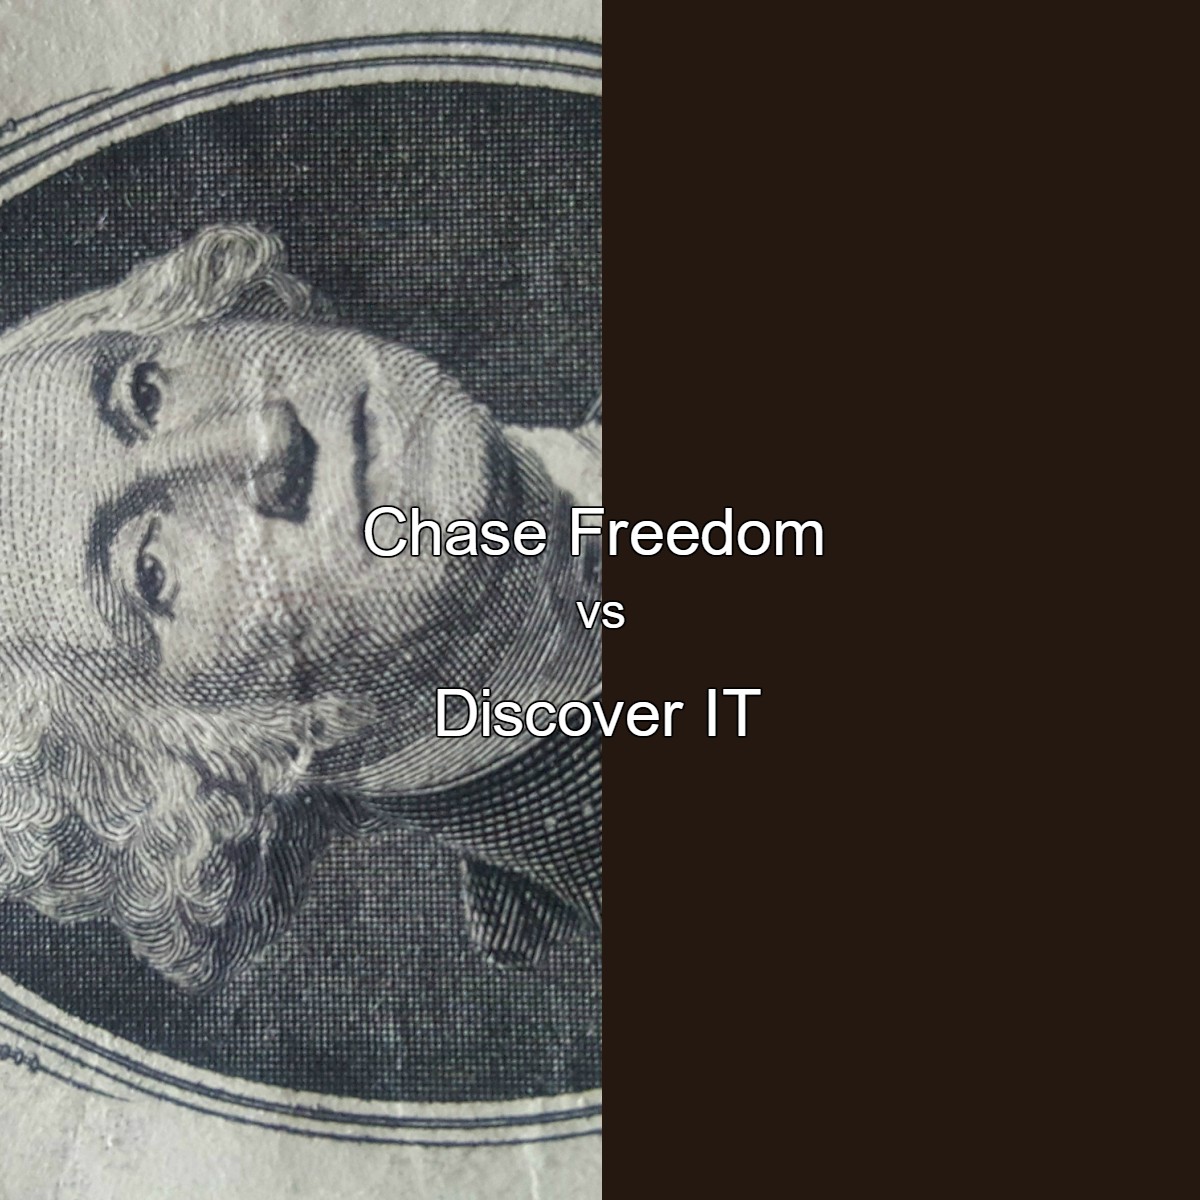 chase freedom vs Discover IT